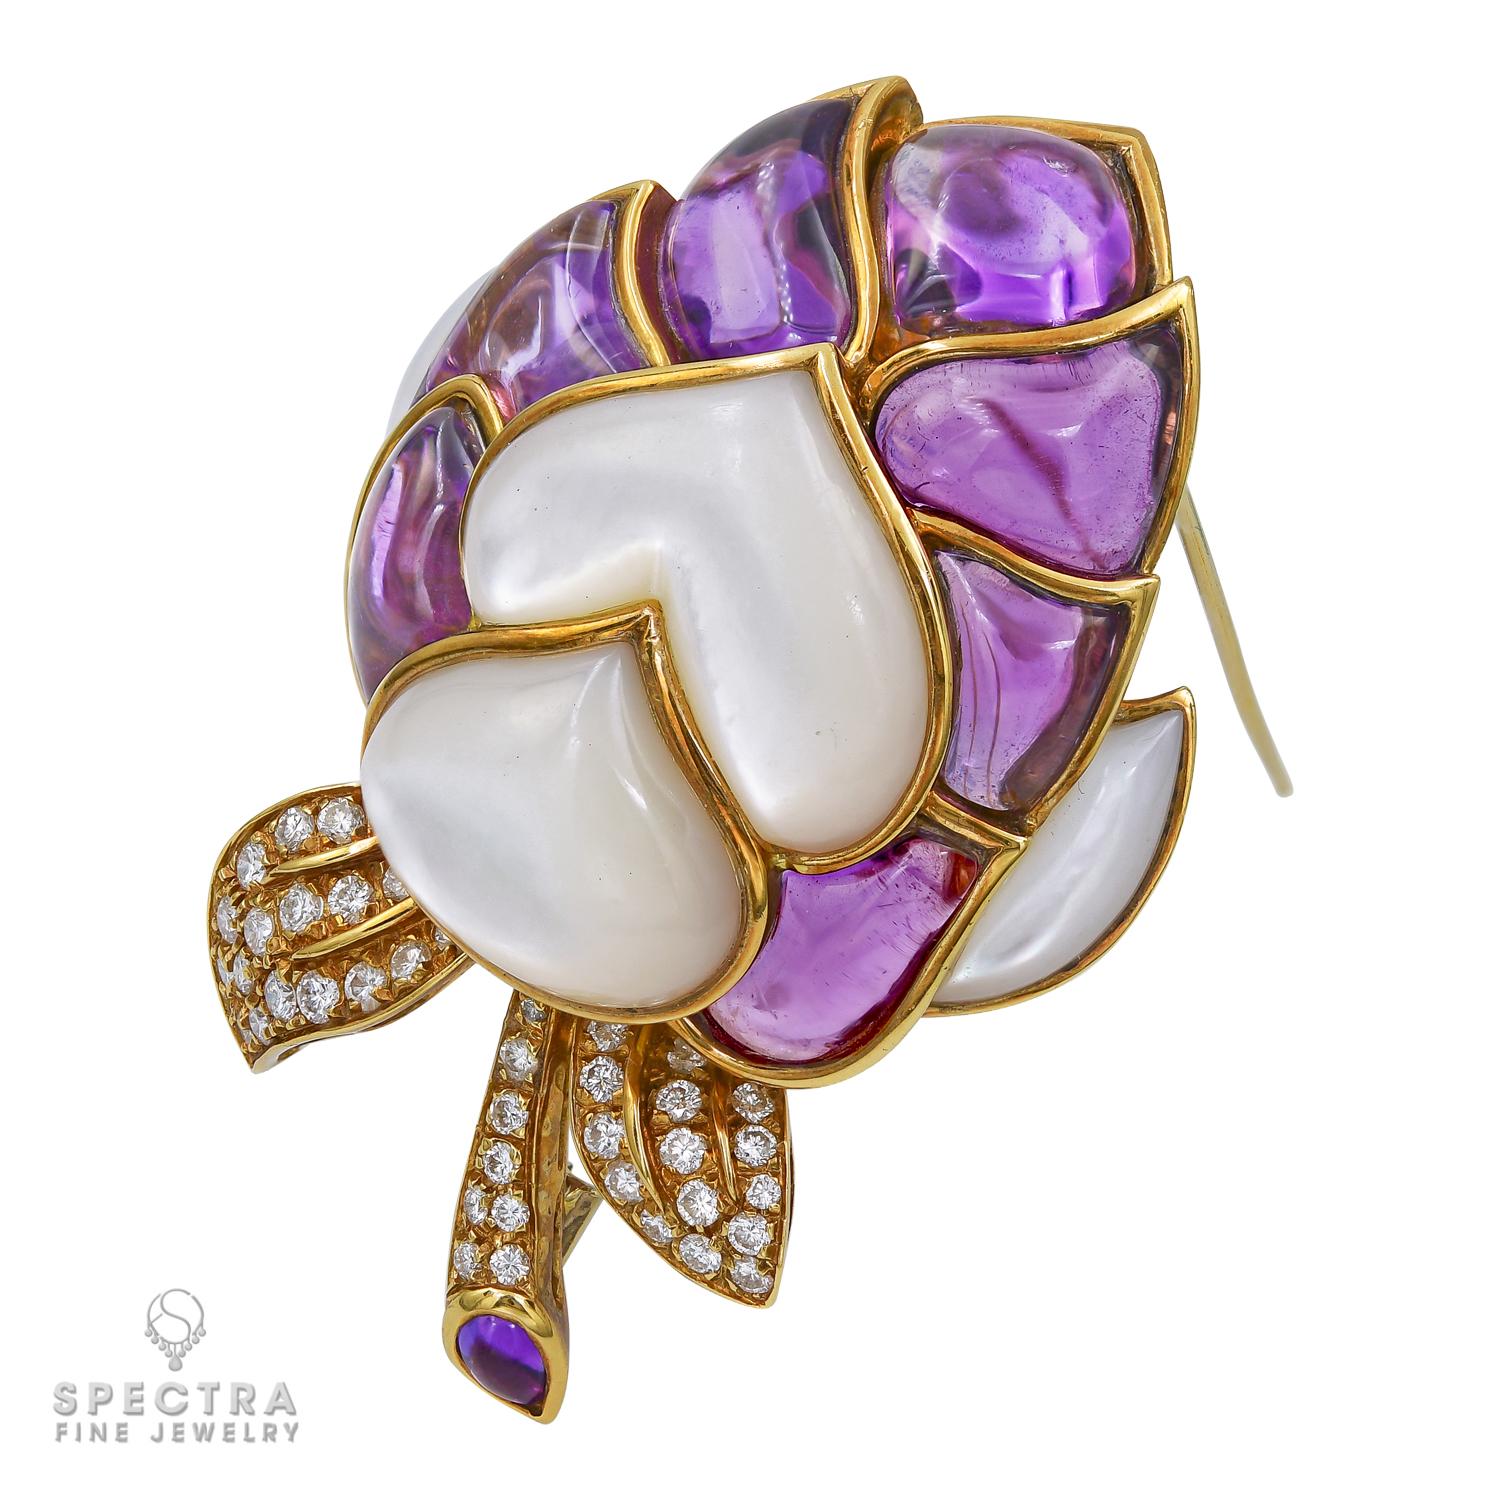 A beautiful brooch with beautiful amethyst stones and mother-of-pearl sitting closely together. Forty four diamonds are set in the leaf design. 
The metal is 18k yellow gold, gross weight 55.5 grams.
Measurements:
L: 2.5 in (6.5 cm) 
W: 1 3/4 in